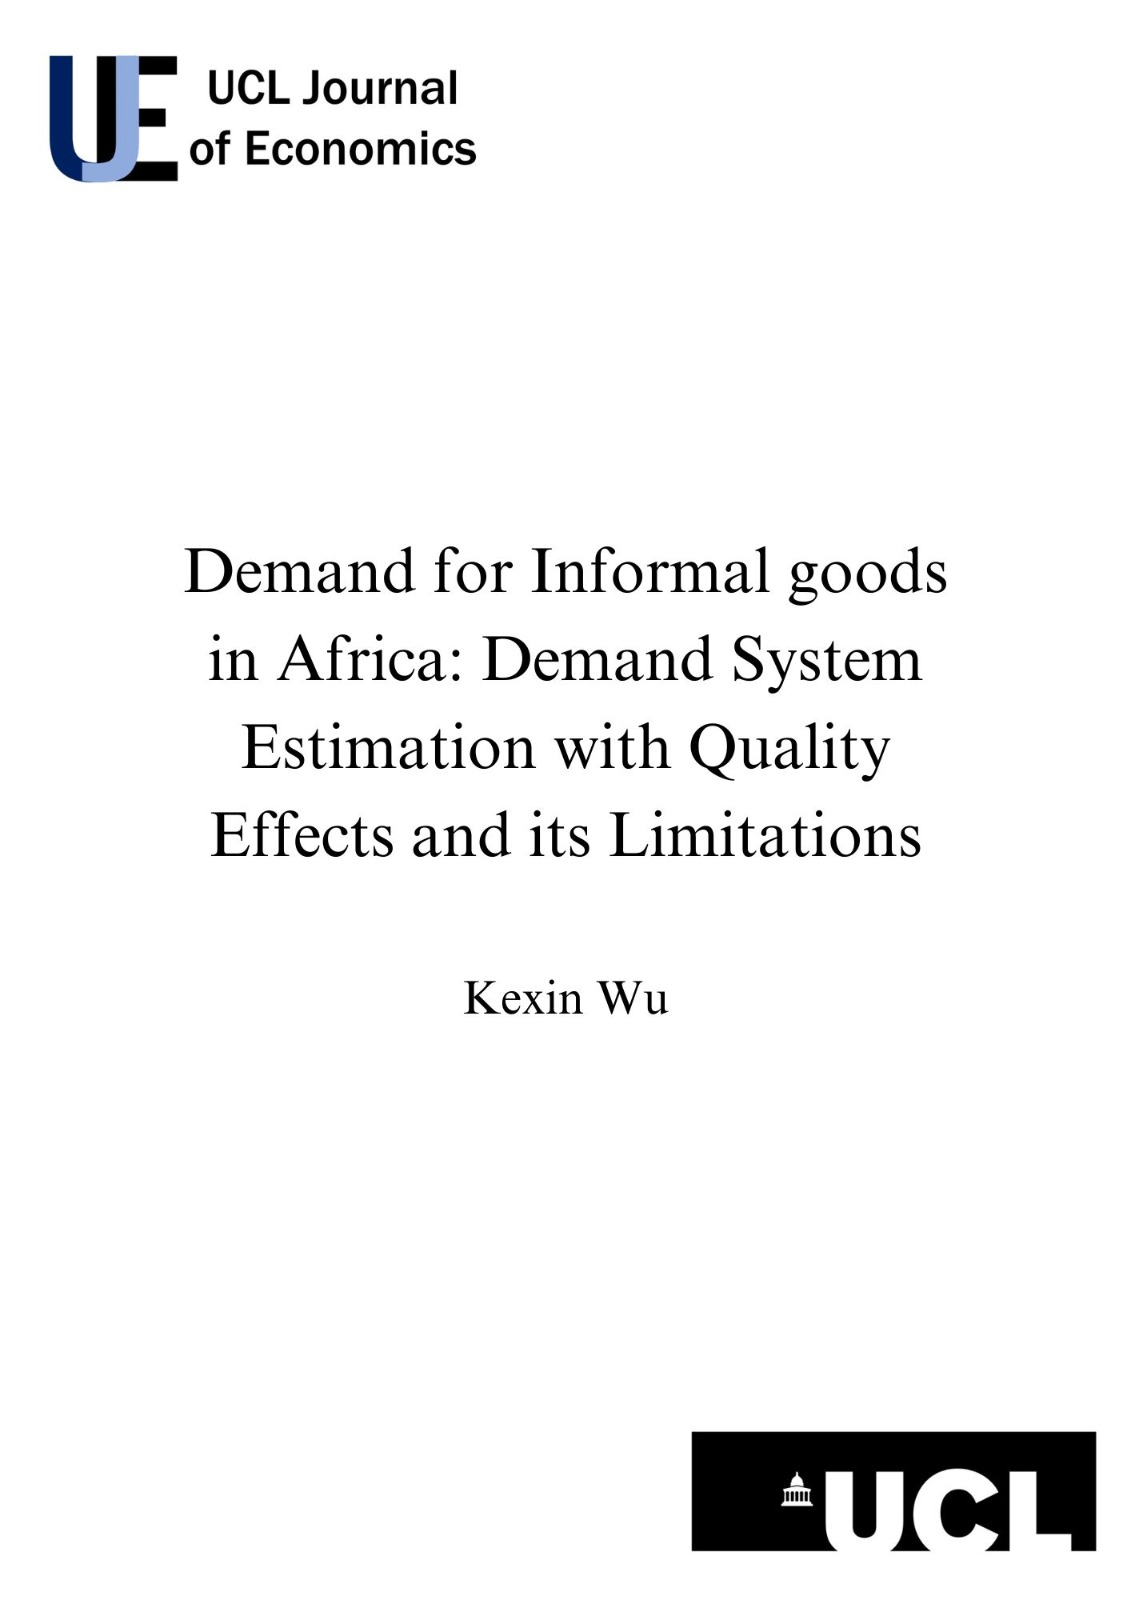 Demand for Informal goods in Africa: Demand System Estimation with Quality Effects and its Limitations